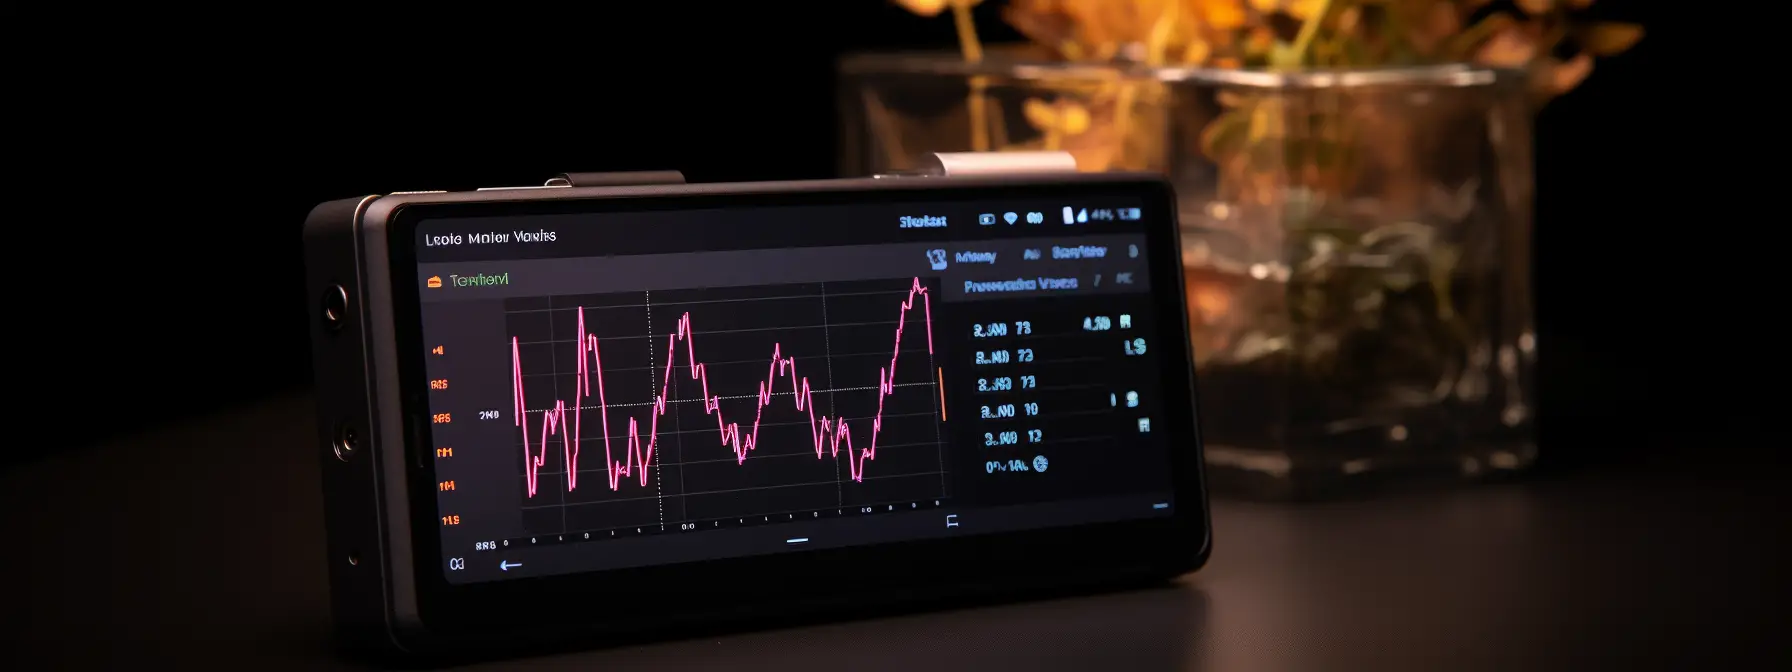 A line graph used to visualize data is being displayed on a mobile device